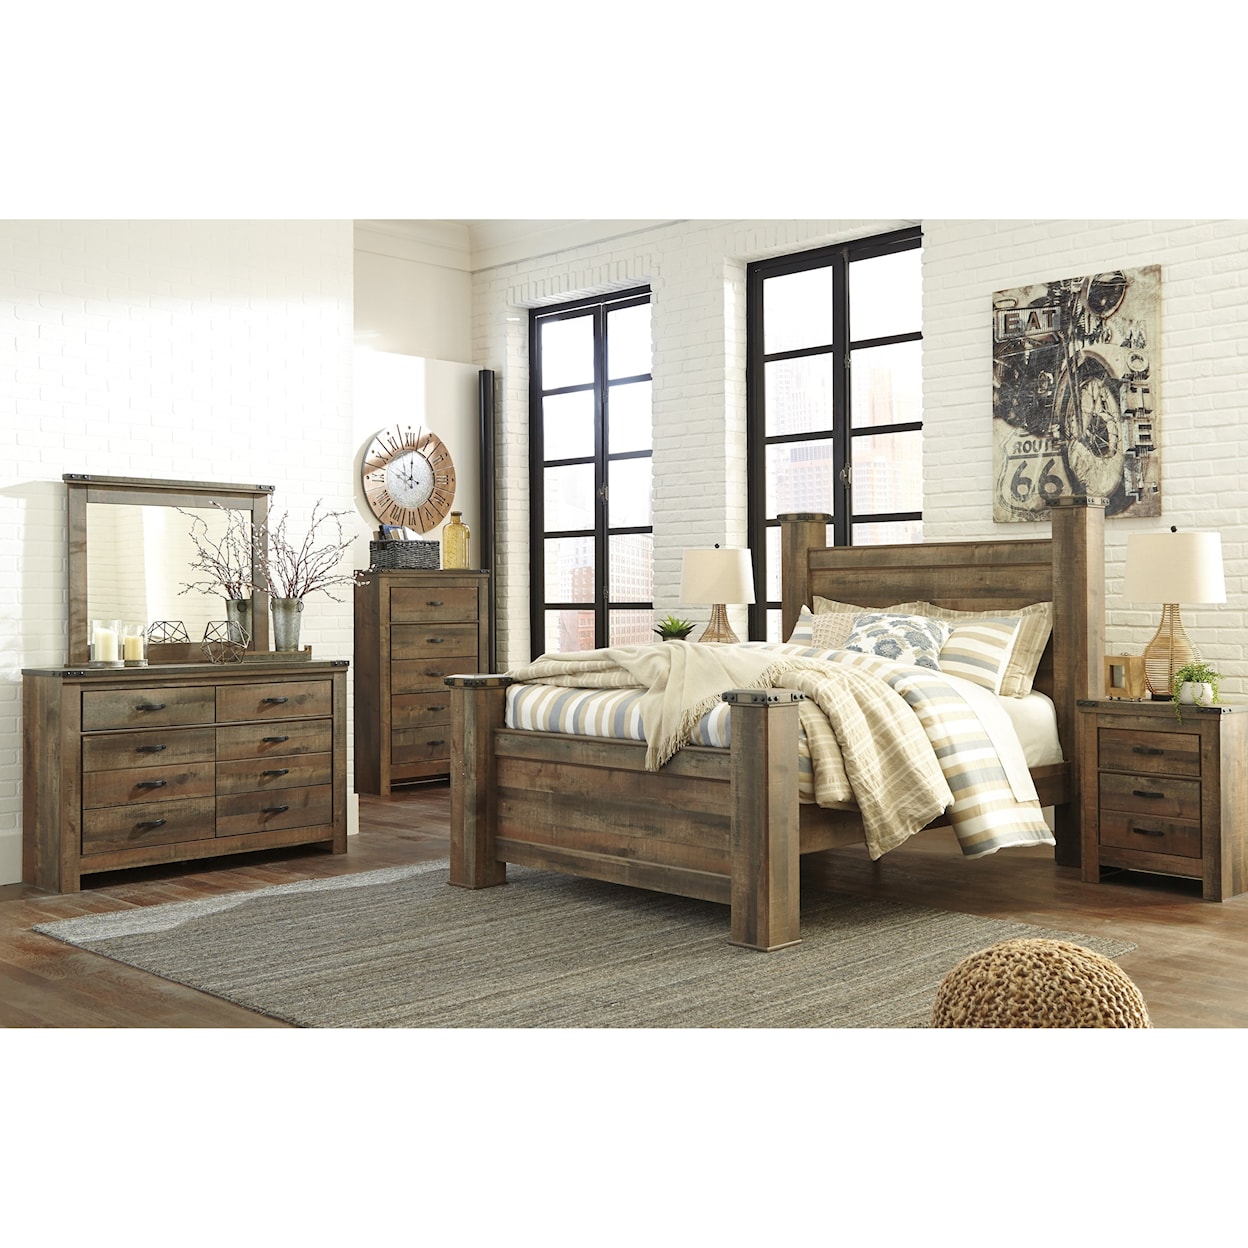 Signature Design Trinell Queen Poster Bed